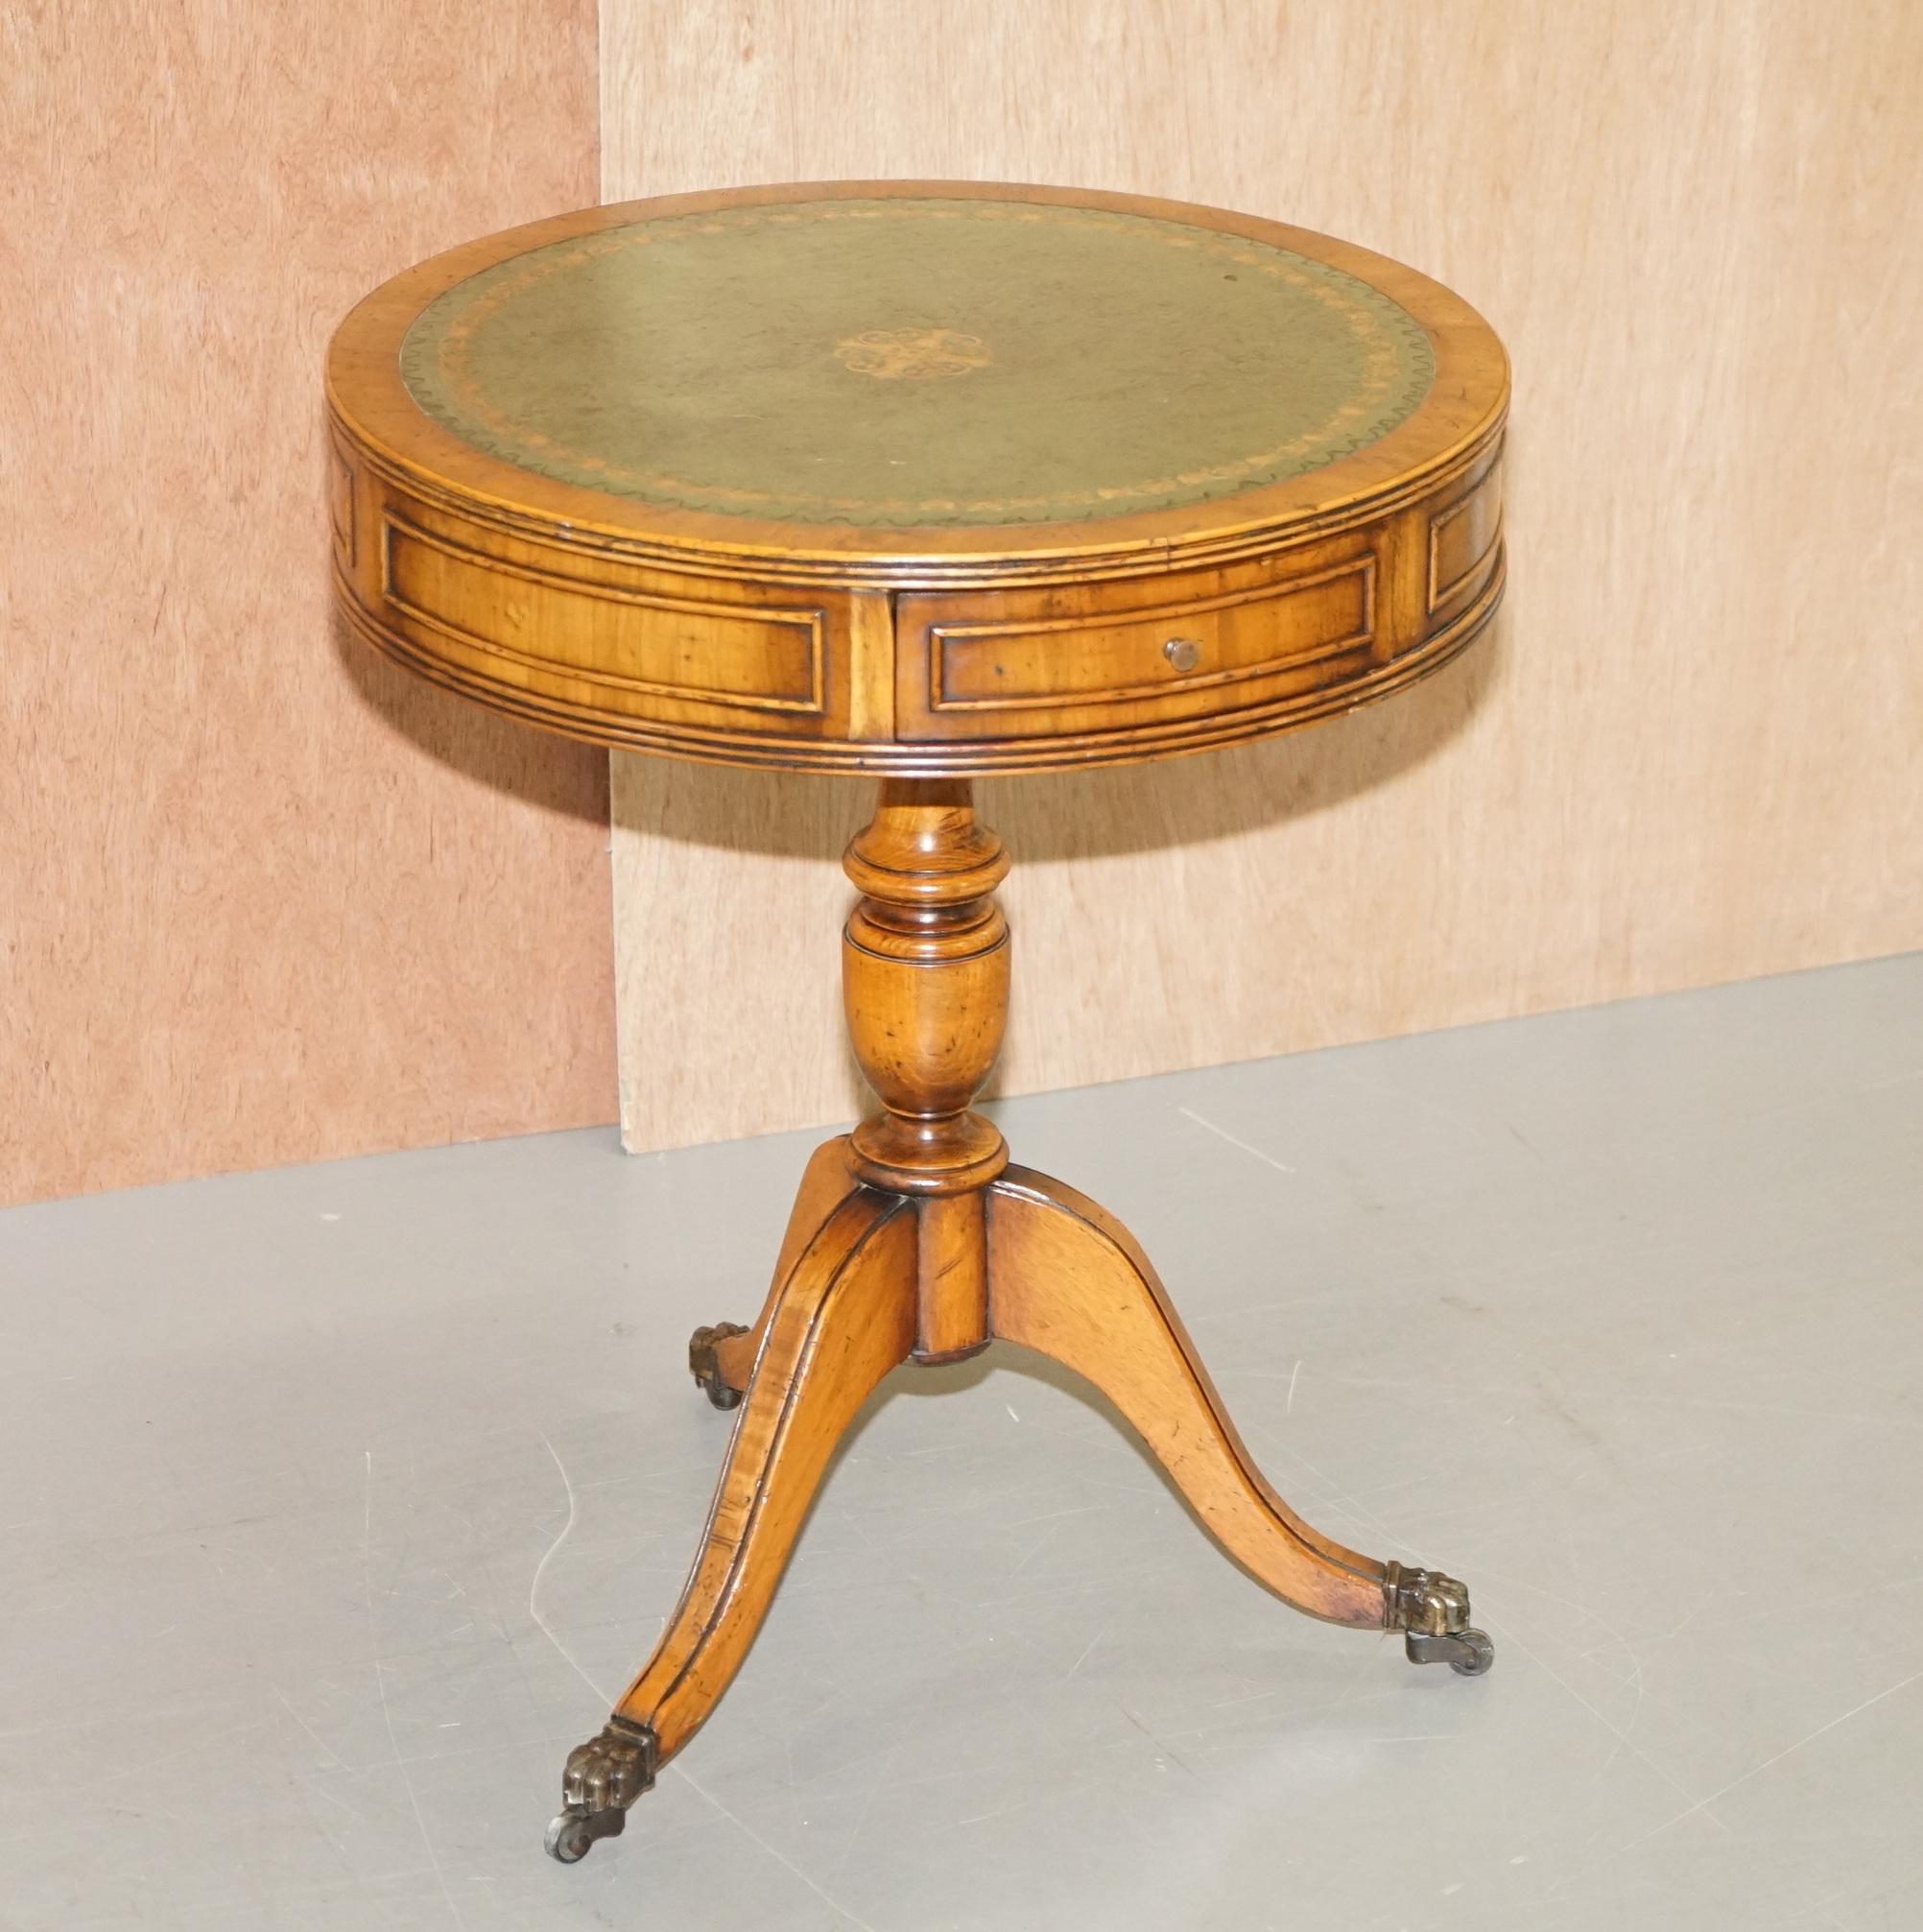 We are delighted to this lovely Bevan Funnell burr yew with green leather gold leaf tooled top, Regency style side drum table 

A very good looking and well-made piece, the leather top is gold leaf embossed, the table has three nice sized drawers